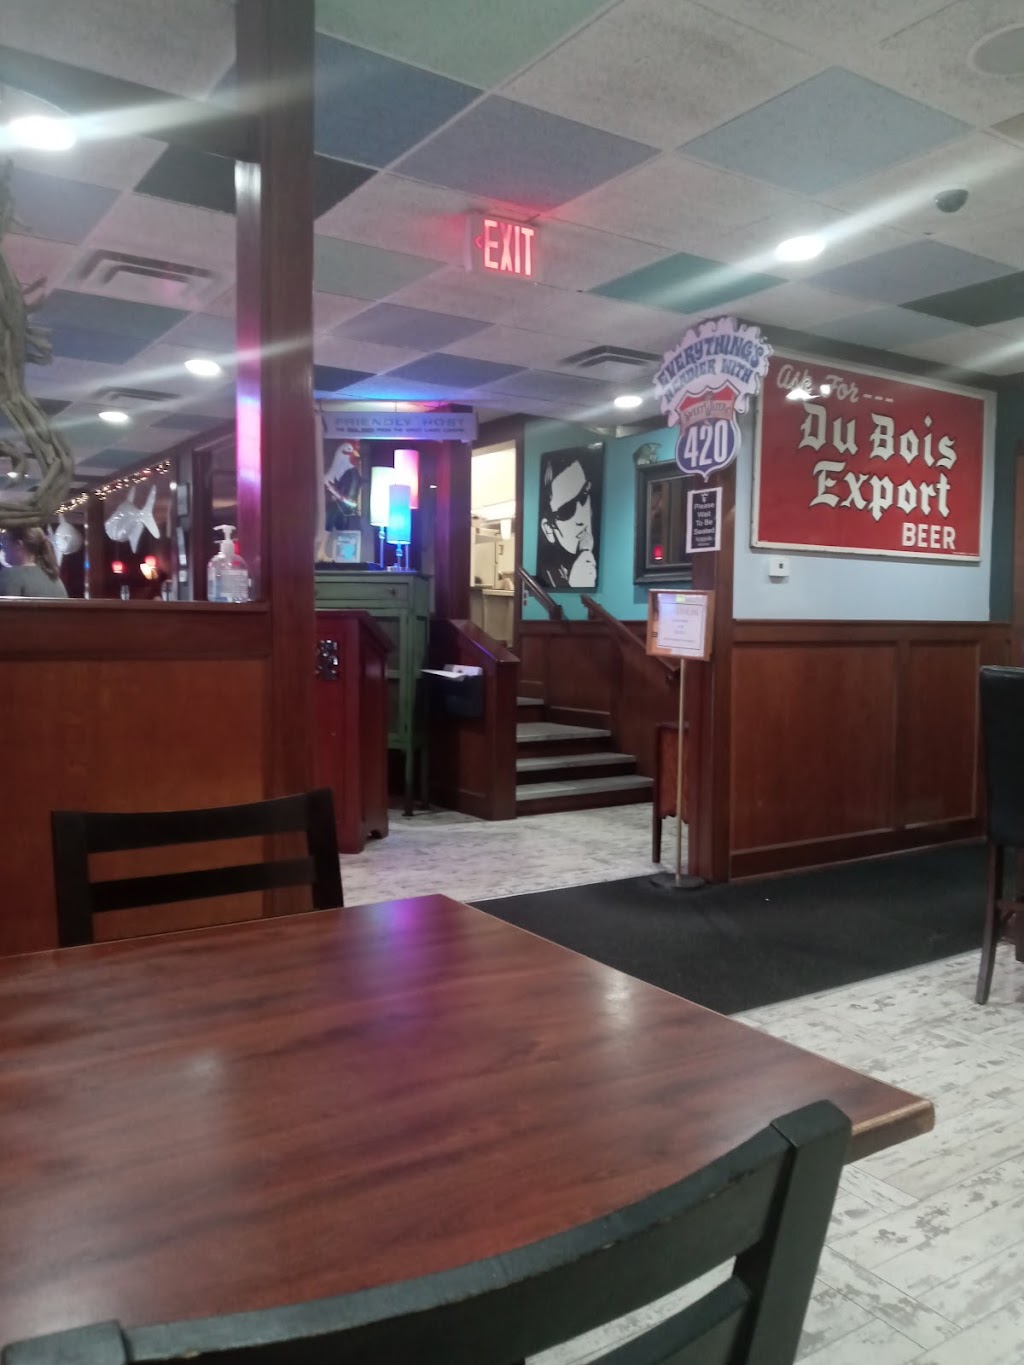 Local Taverns Fish Bar | 11 Chester St, Painesville, OH 44077 | Phone: (440) 867-2330